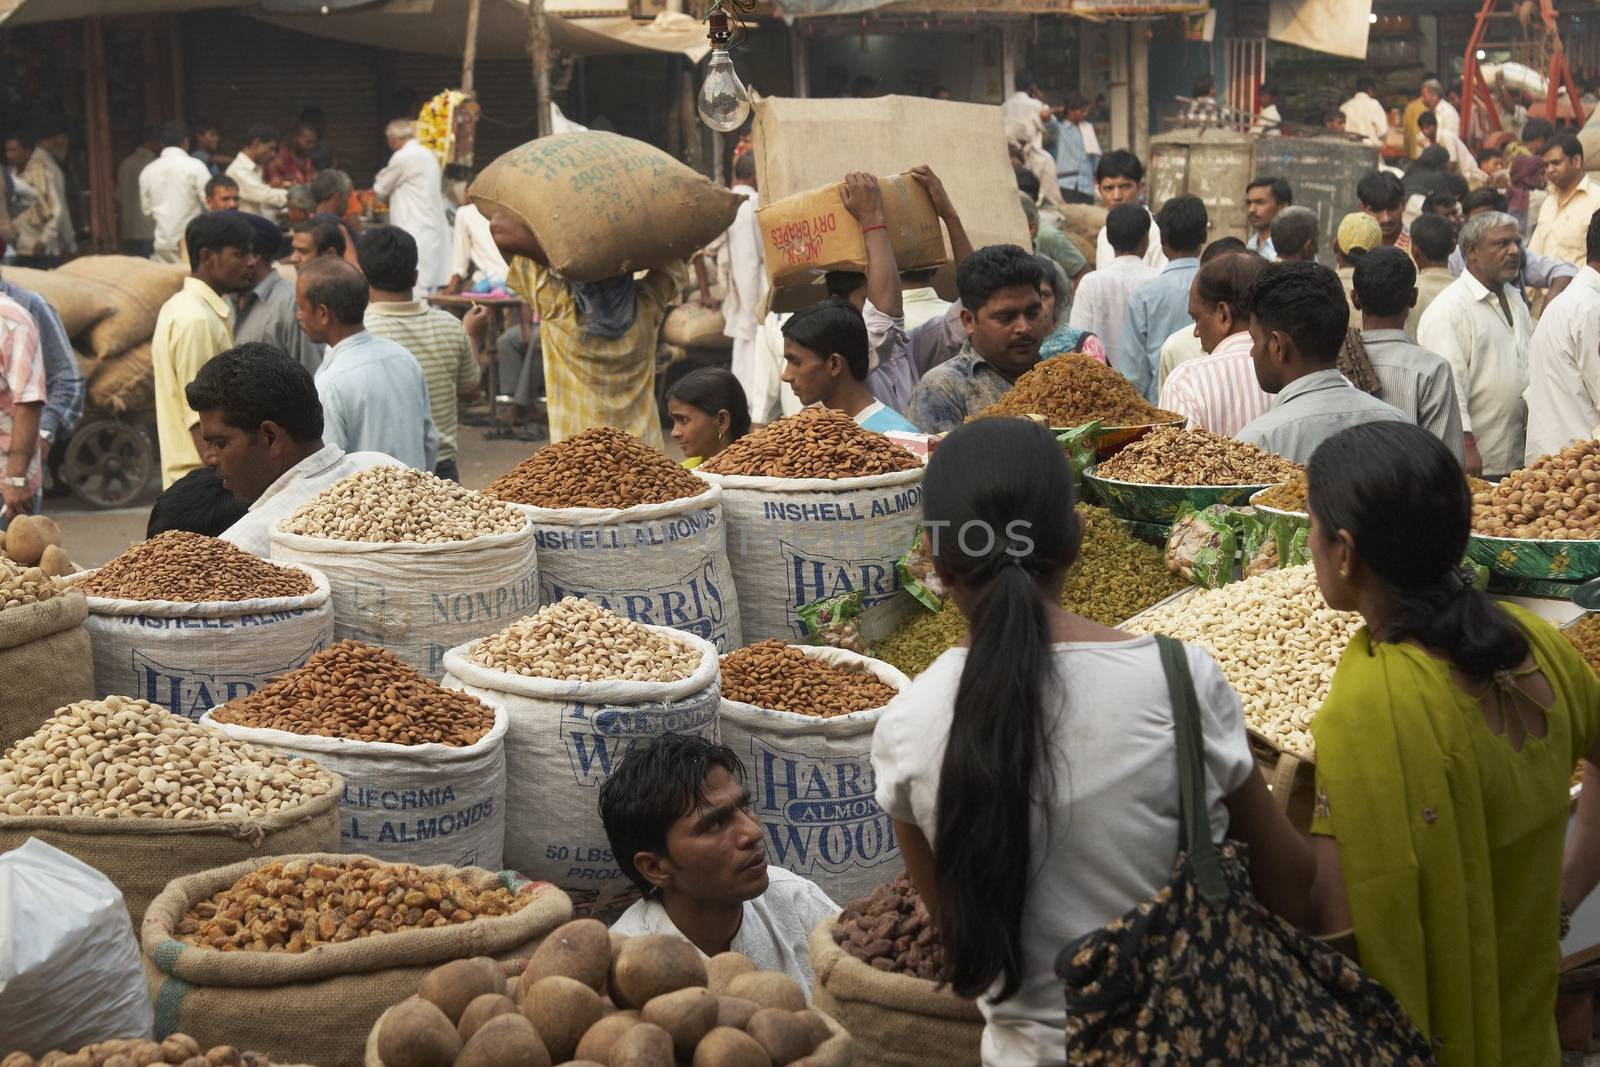 Nuts for sale in the crowded streets of Old Delhi, India